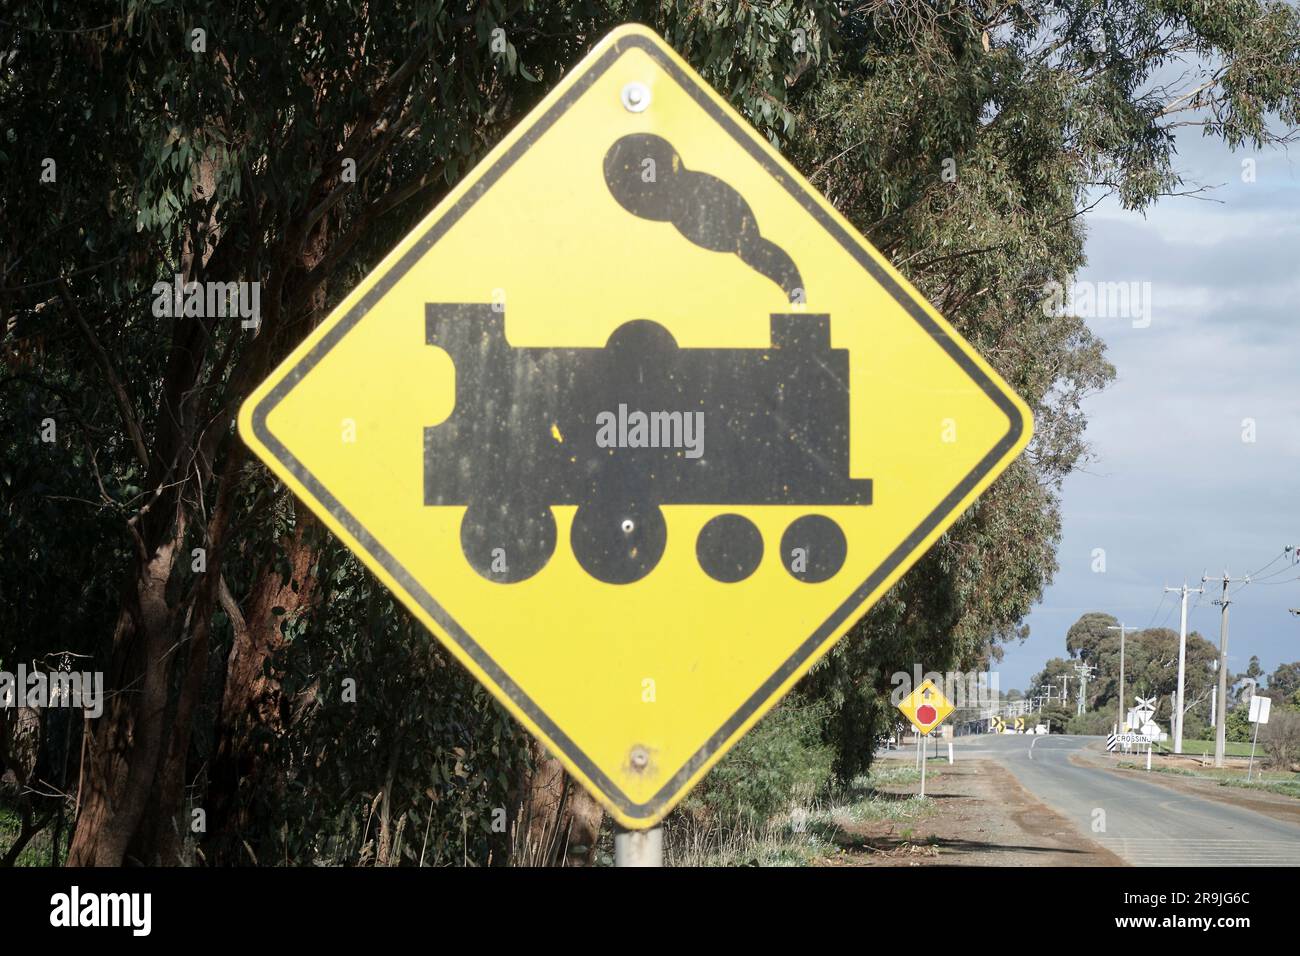 The Black Silhouette of a Steam Train Road Sign warning of a rail crossing ahead. Stock Photo